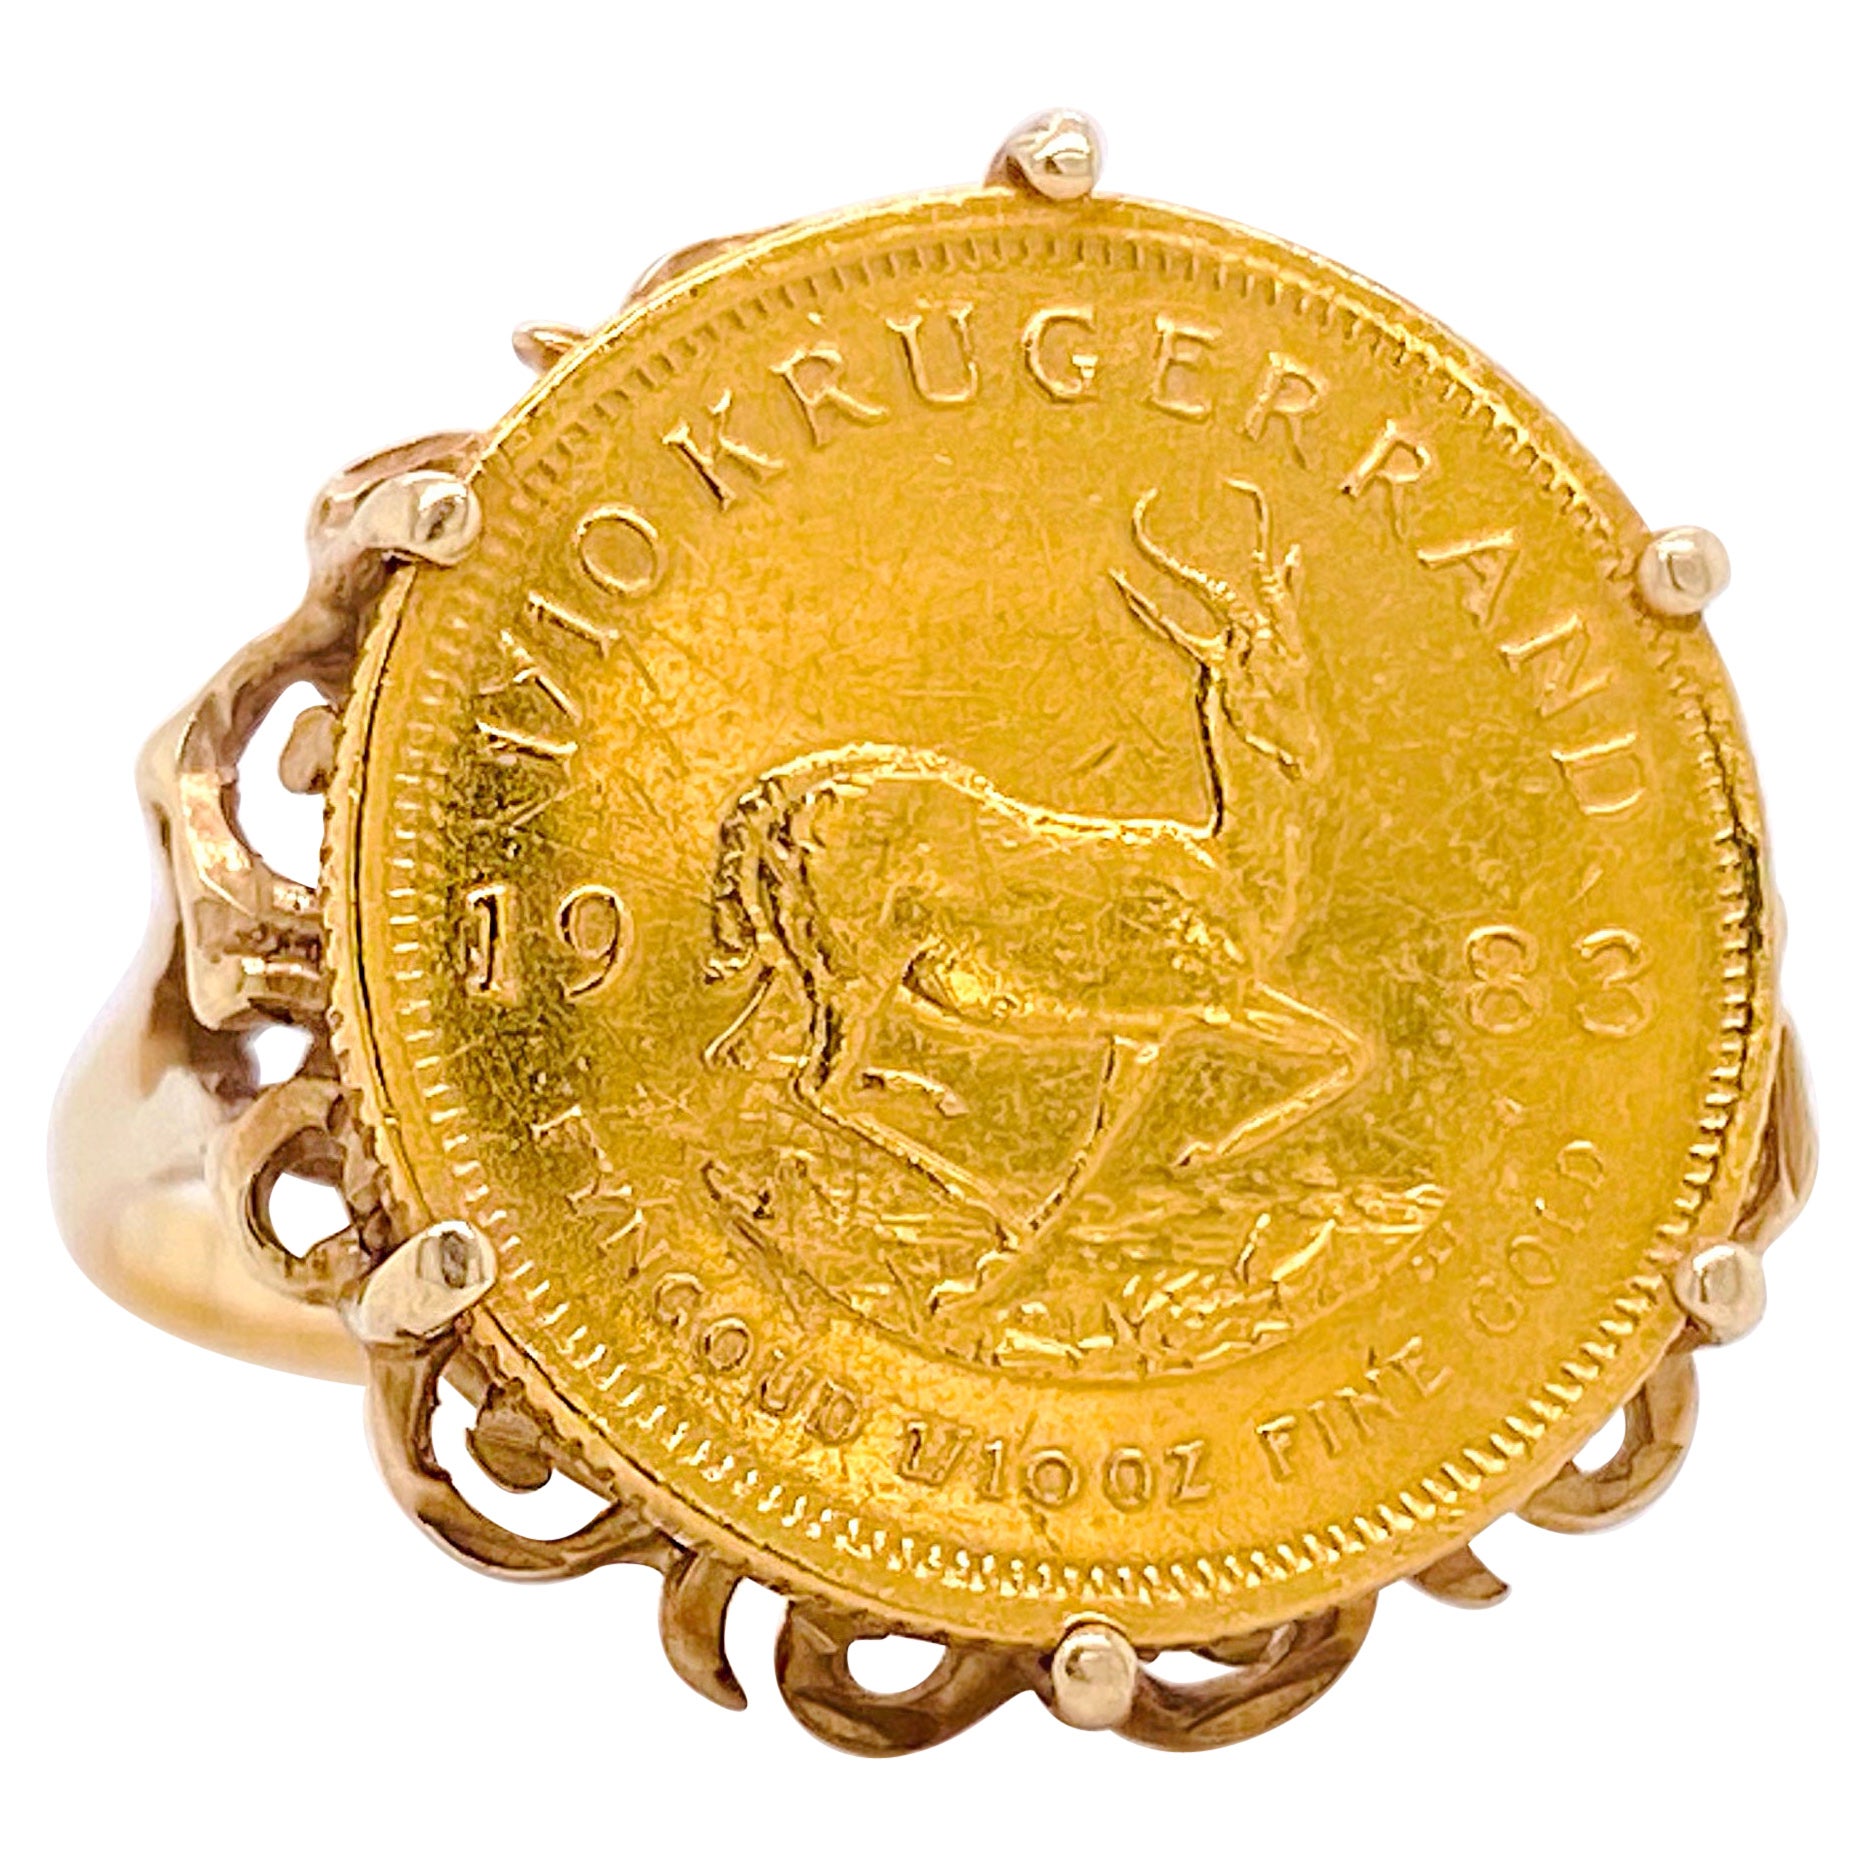 Krugerrand Coin Ring, Genuine South African Coin Ring, 1983 Coin